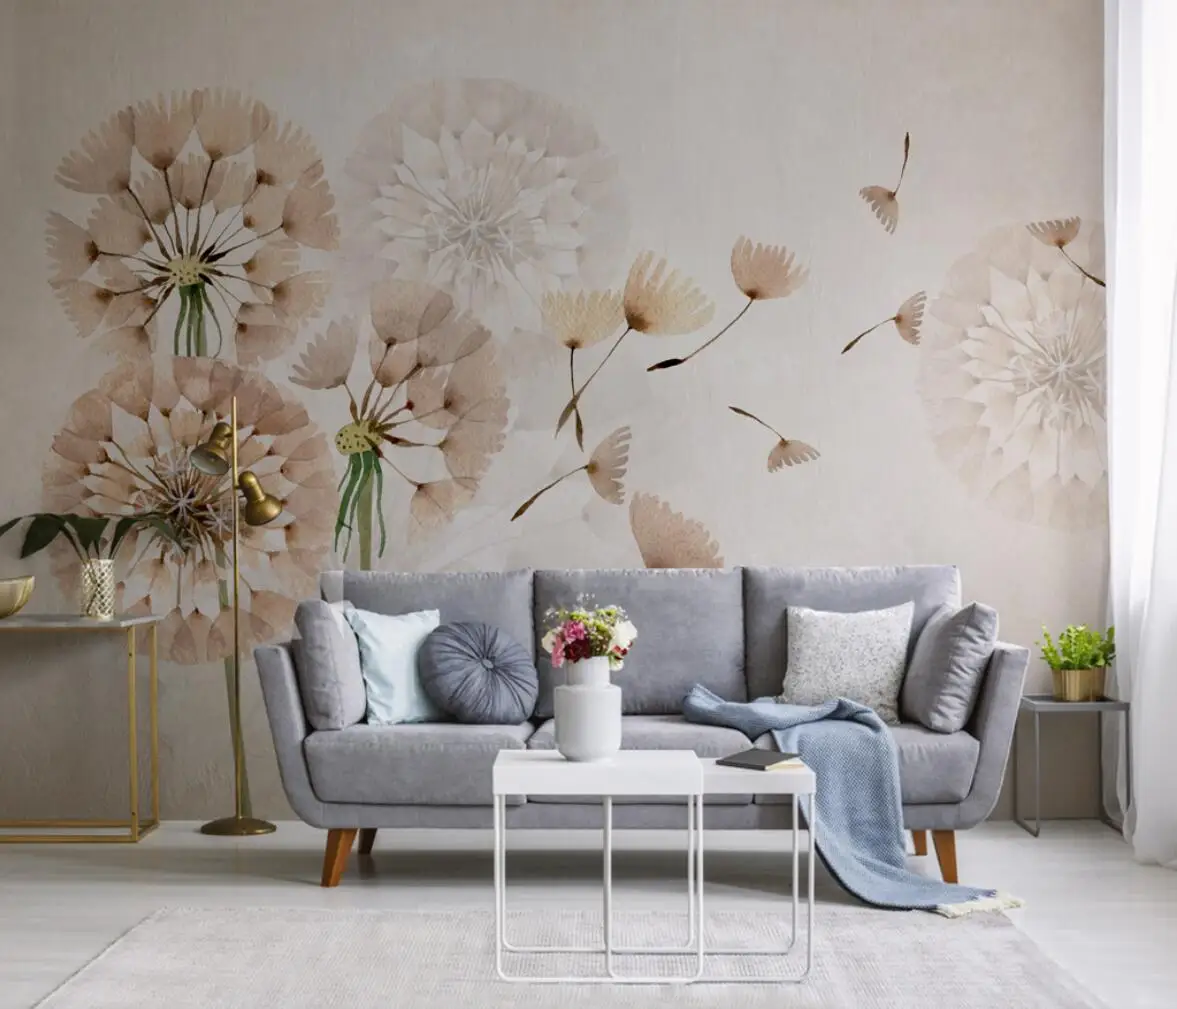 Custom papel de parede 3D Mural Wallpaper Oil Painting TV Background Wall Papers Home Decor wallpapers for Living Room Bedroom custom photo wallpaper modern 3d hand painted nostalgic rose flower mural living room tv sofa bedroom home decor papel de parede